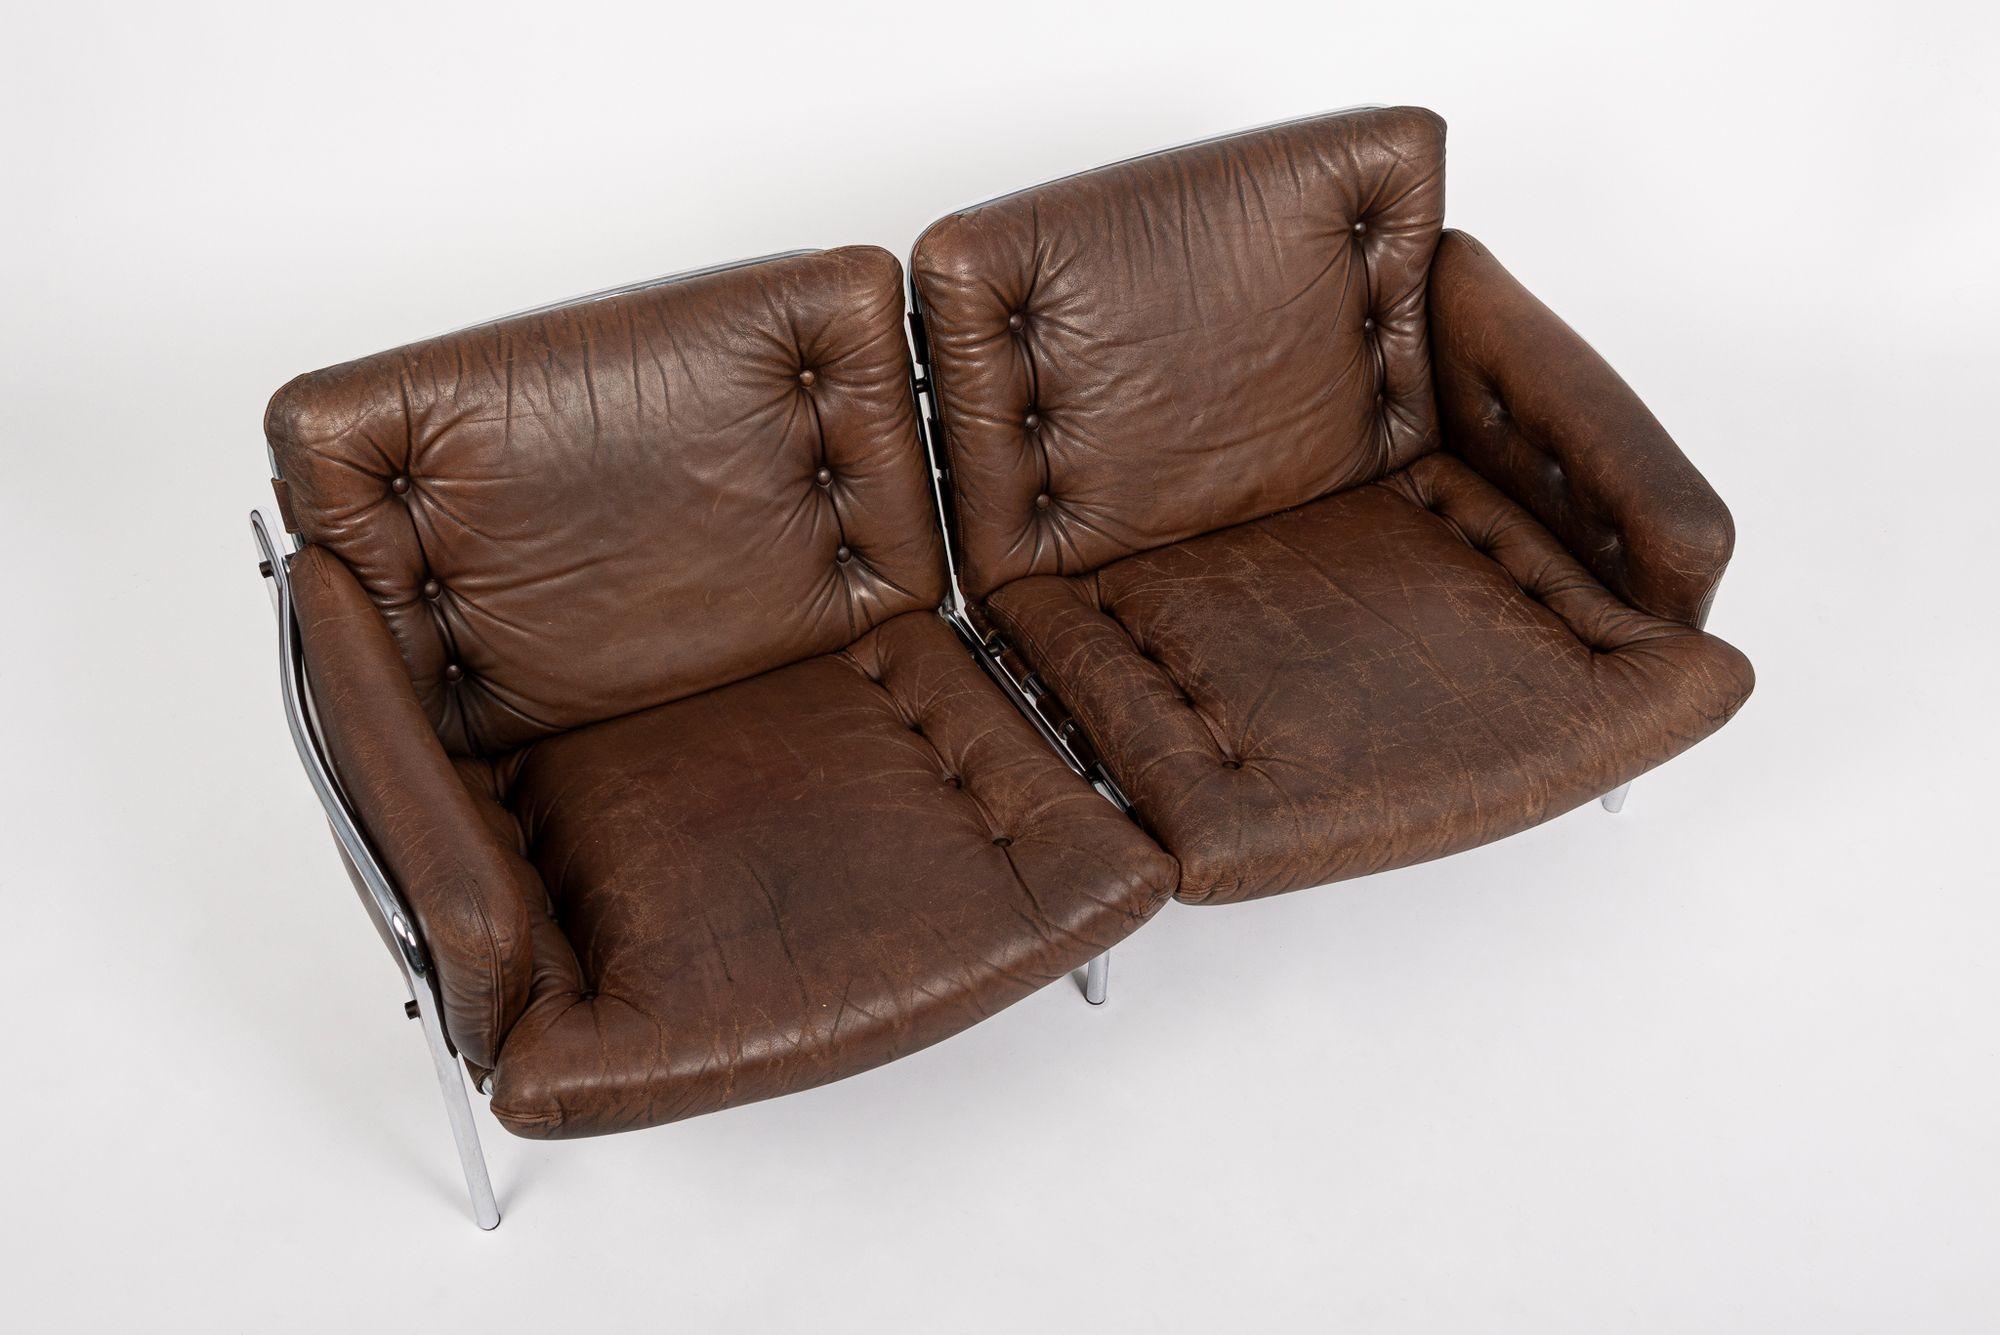 American Mid Century Modern Brown Leather Loveseat Sofa 1970s For Sale